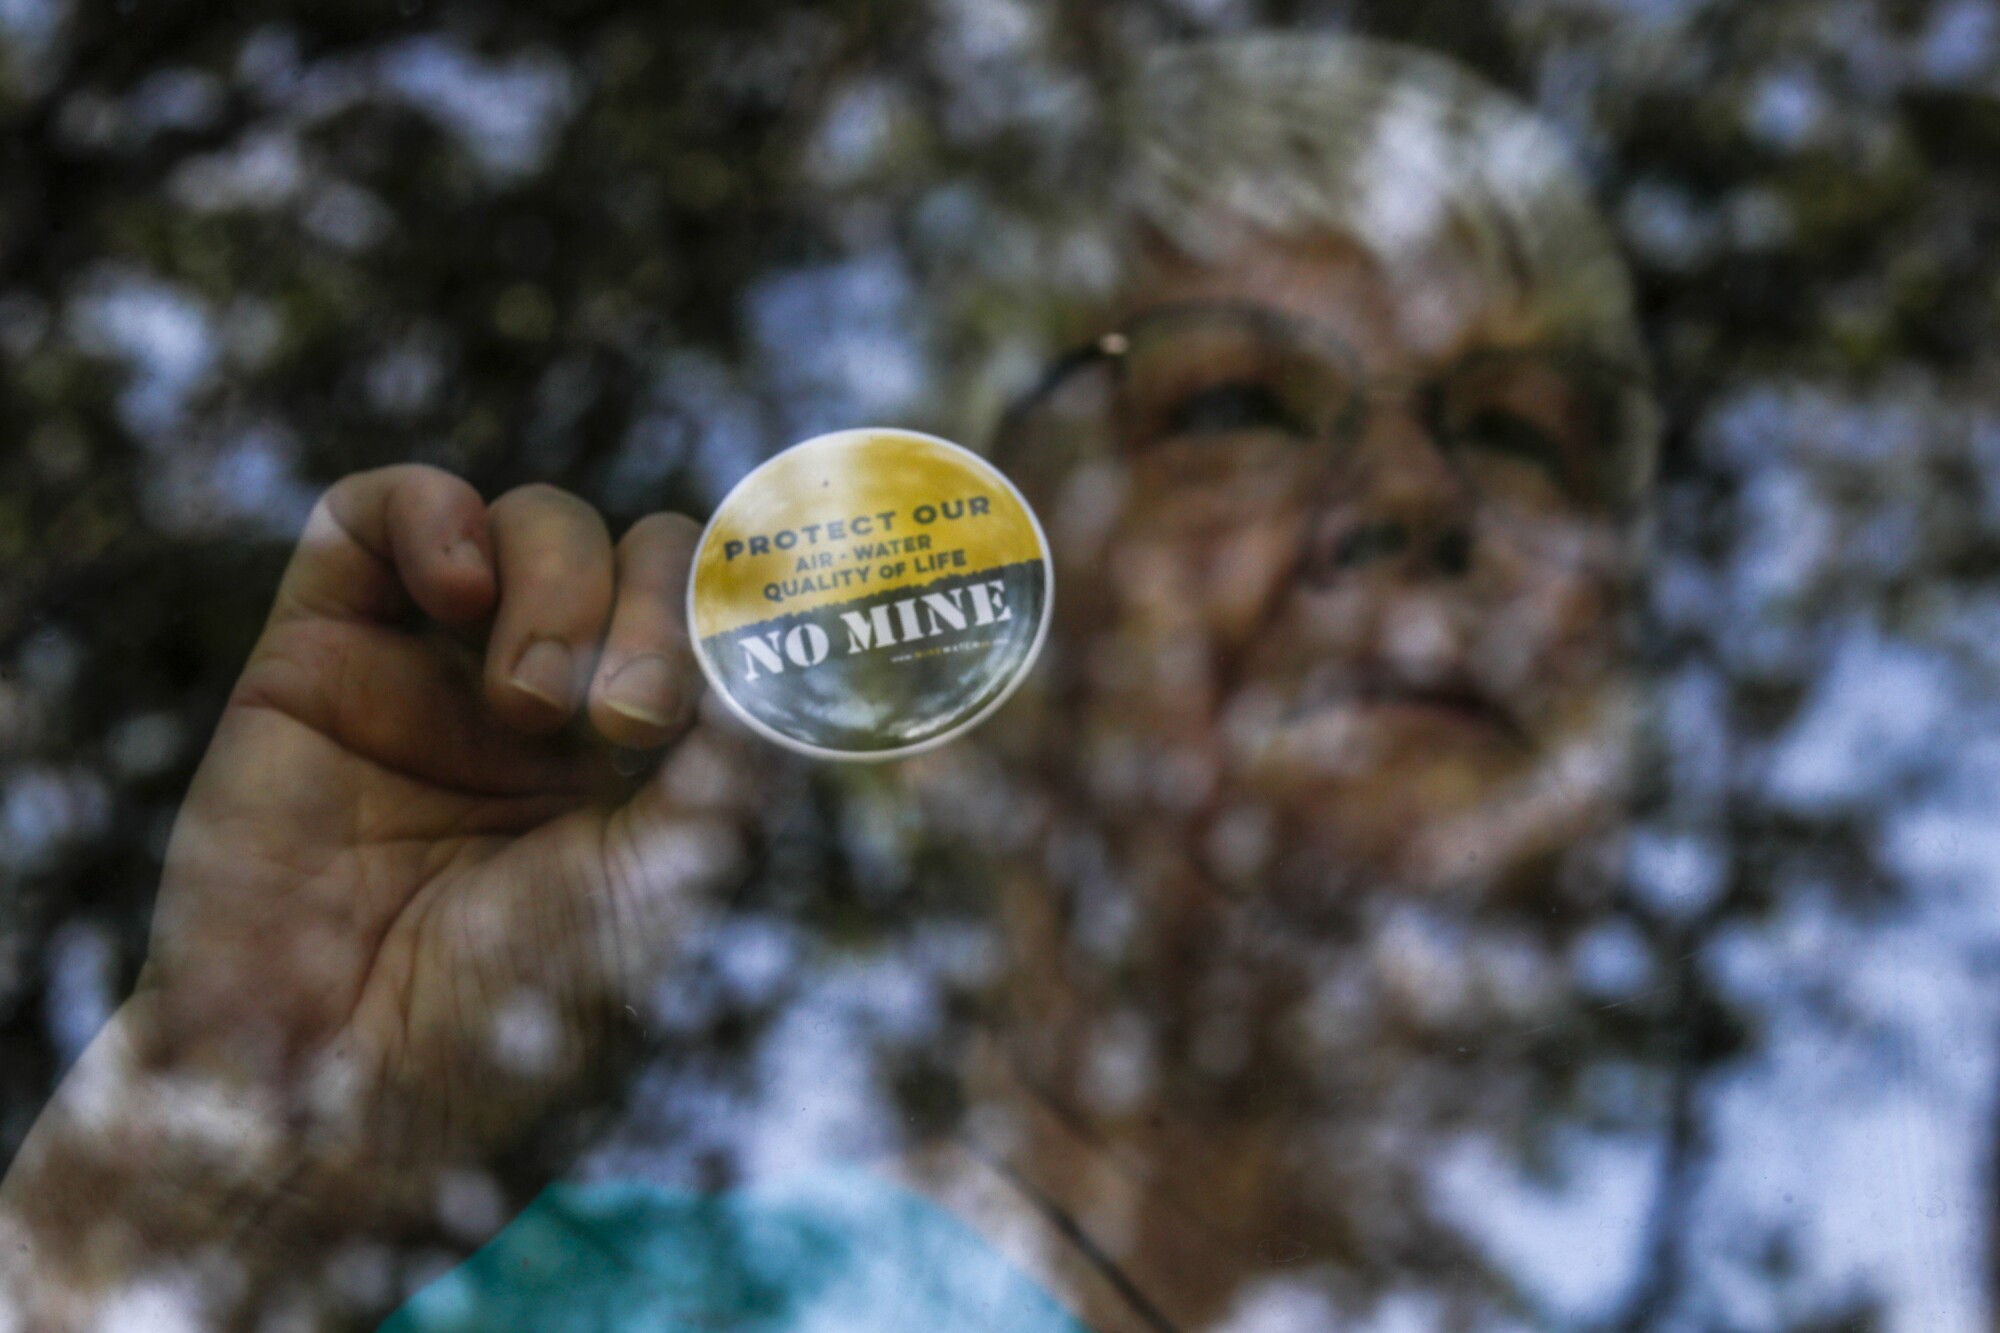 A woman stands in a window displaying a sticker that reads, "No mine"